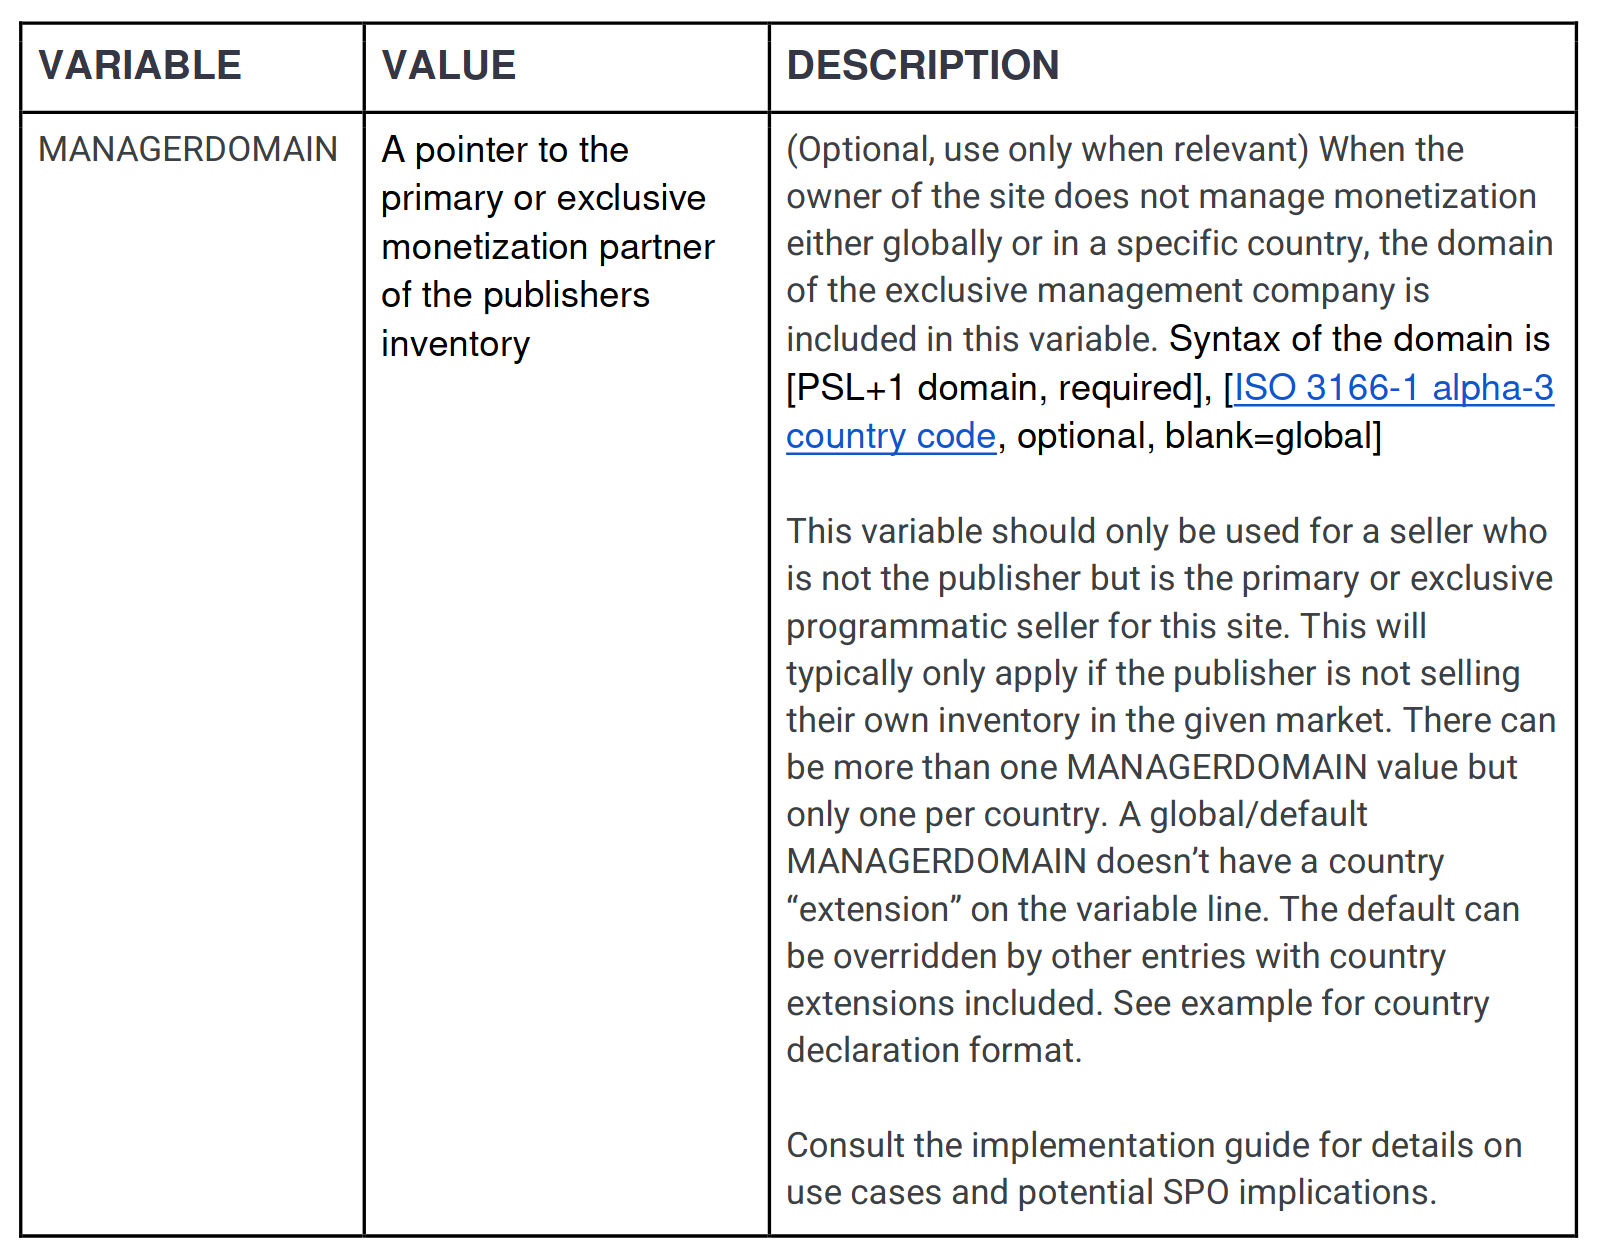 Variable: "MANAGERDOMAIN", Value: "A pointer to the primary or exclusive monetization partner of the publishers inventory", Description: "(Optional, use only when relevant) When the owner of the site does not manage monetization either globally or in a specific country, the domain of the exclusive management company is included in this variable. Syntax of the domain is [PSL+1 domain, required], [ISO 3166-1 alpha-3 country code, optional, blank=global] This variable should only be used for a seller who is not the publisher but is the primary or exclusive programmatic seller for this site. This will typically only apply if the publisher is not selling their own inventory in the given market. There can be more than one MANAGERDOMAIN value but only one per country. A global/default MANAGERDOMAIN doesn’t have a country “extension” on the variable line. The default can be overridden by other entries with country extensions included. See example for country declaration format. Consult the implementation guide for details on use cases and potential SPO implications."